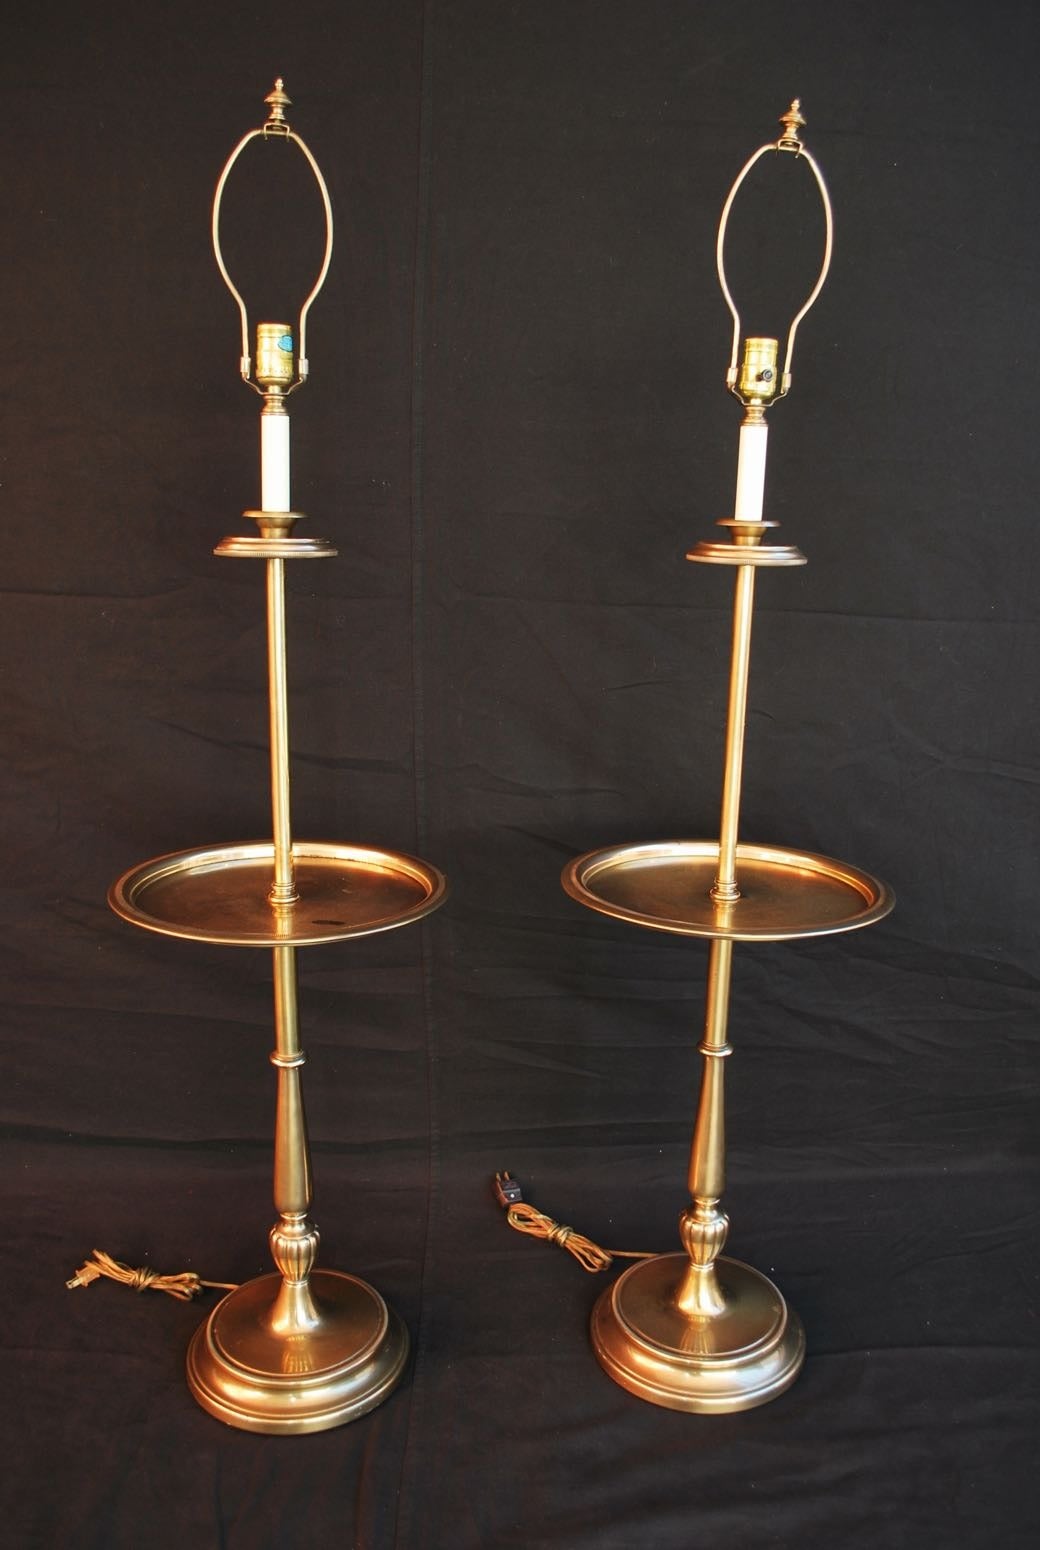 We have over 3000 antique sconces and over 1000 antique lights, if you need a specific pair of sconces or lights; use the 